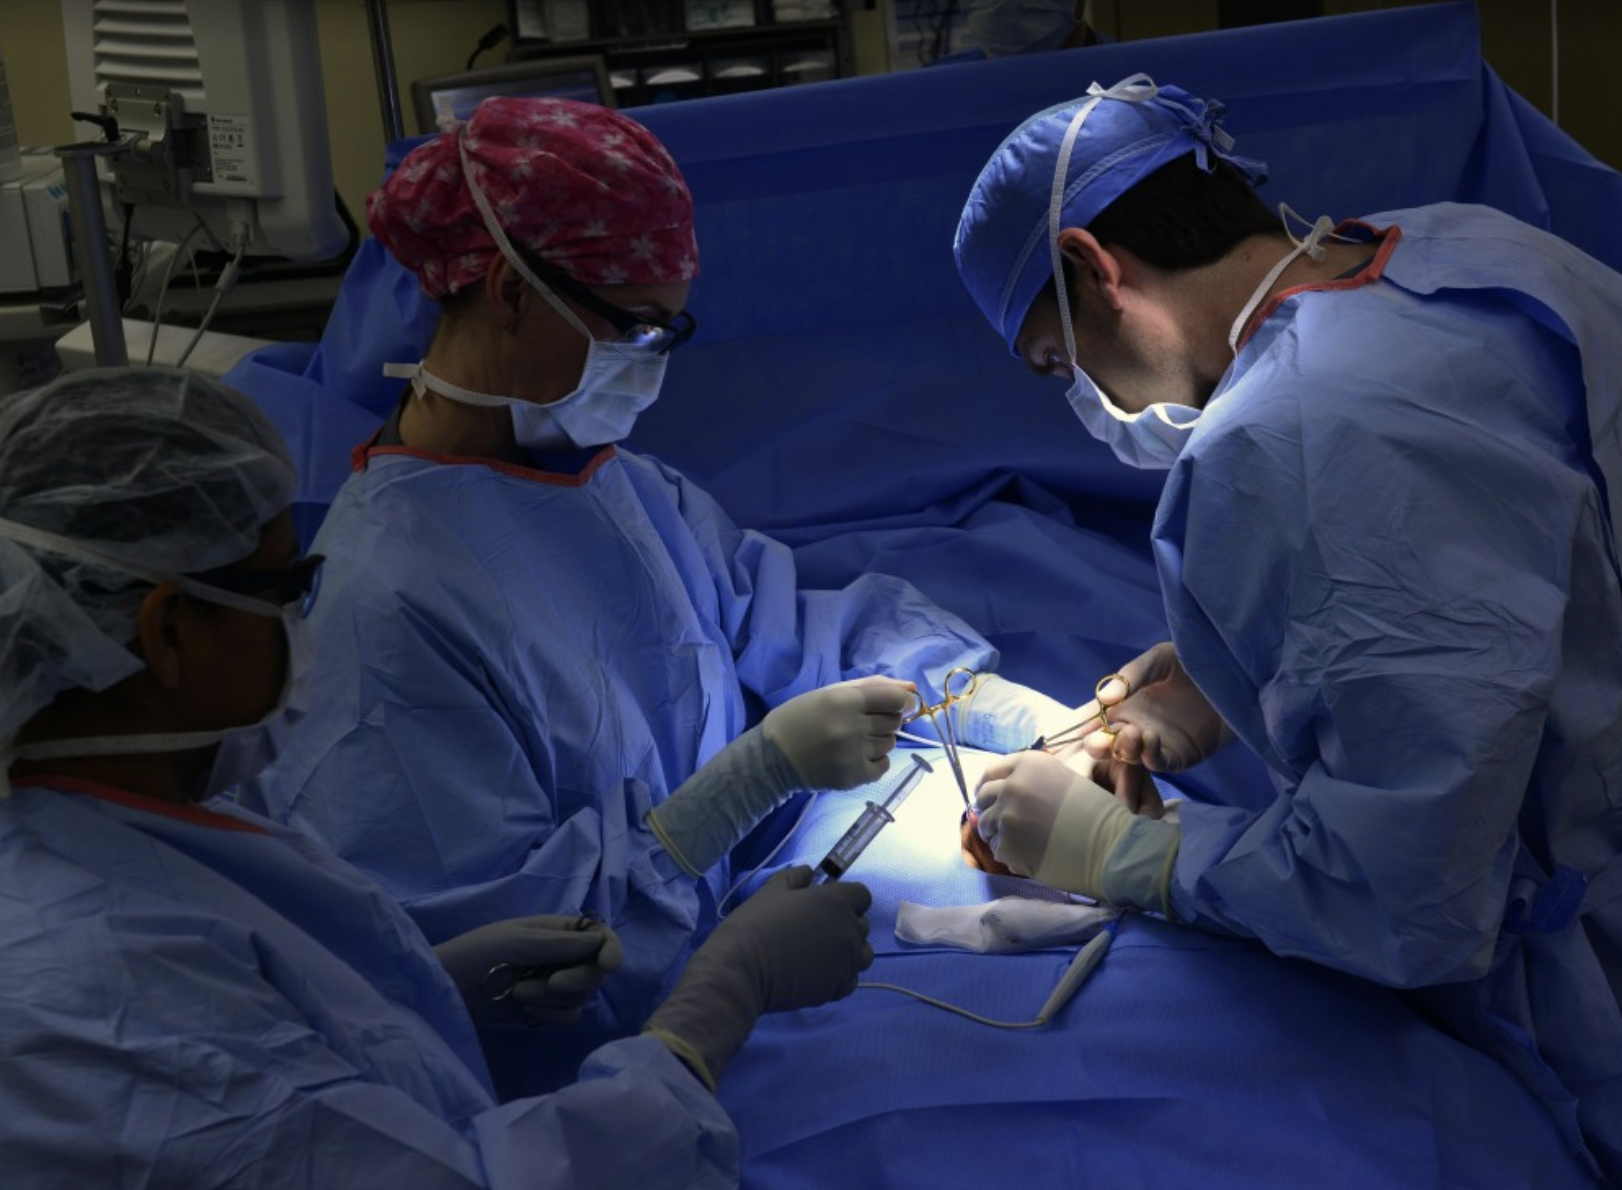 Doctors conducing an operation